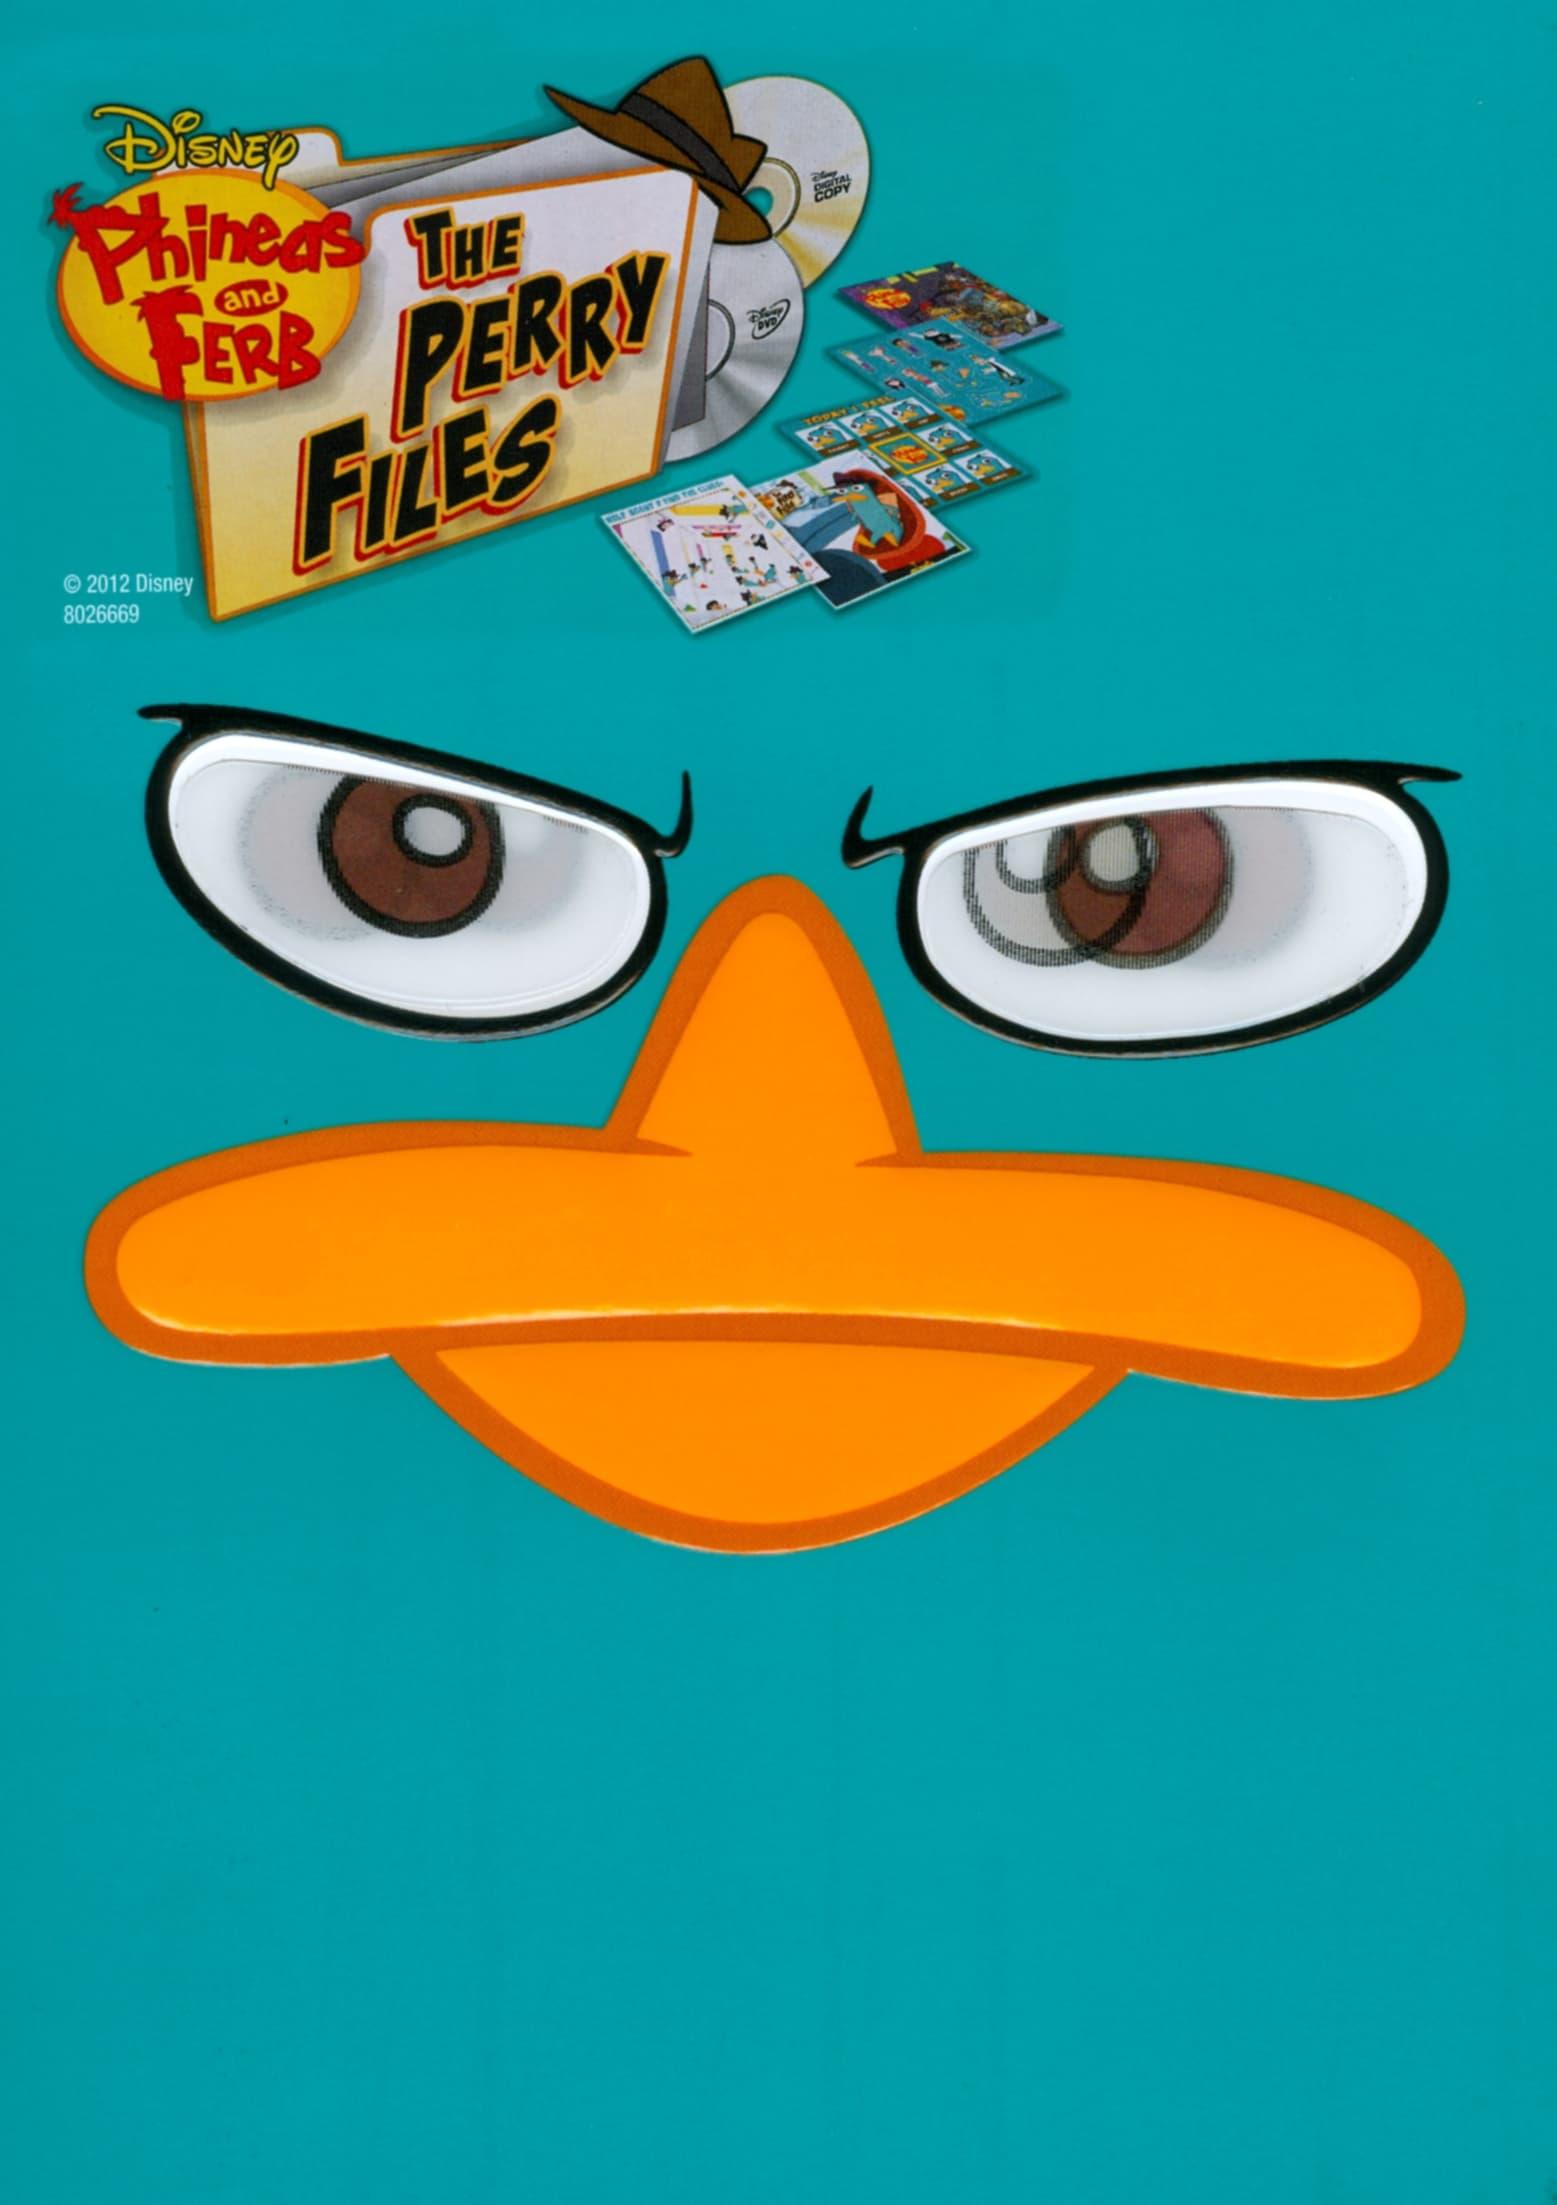 Phineas and Ferb: The Perry Files poster